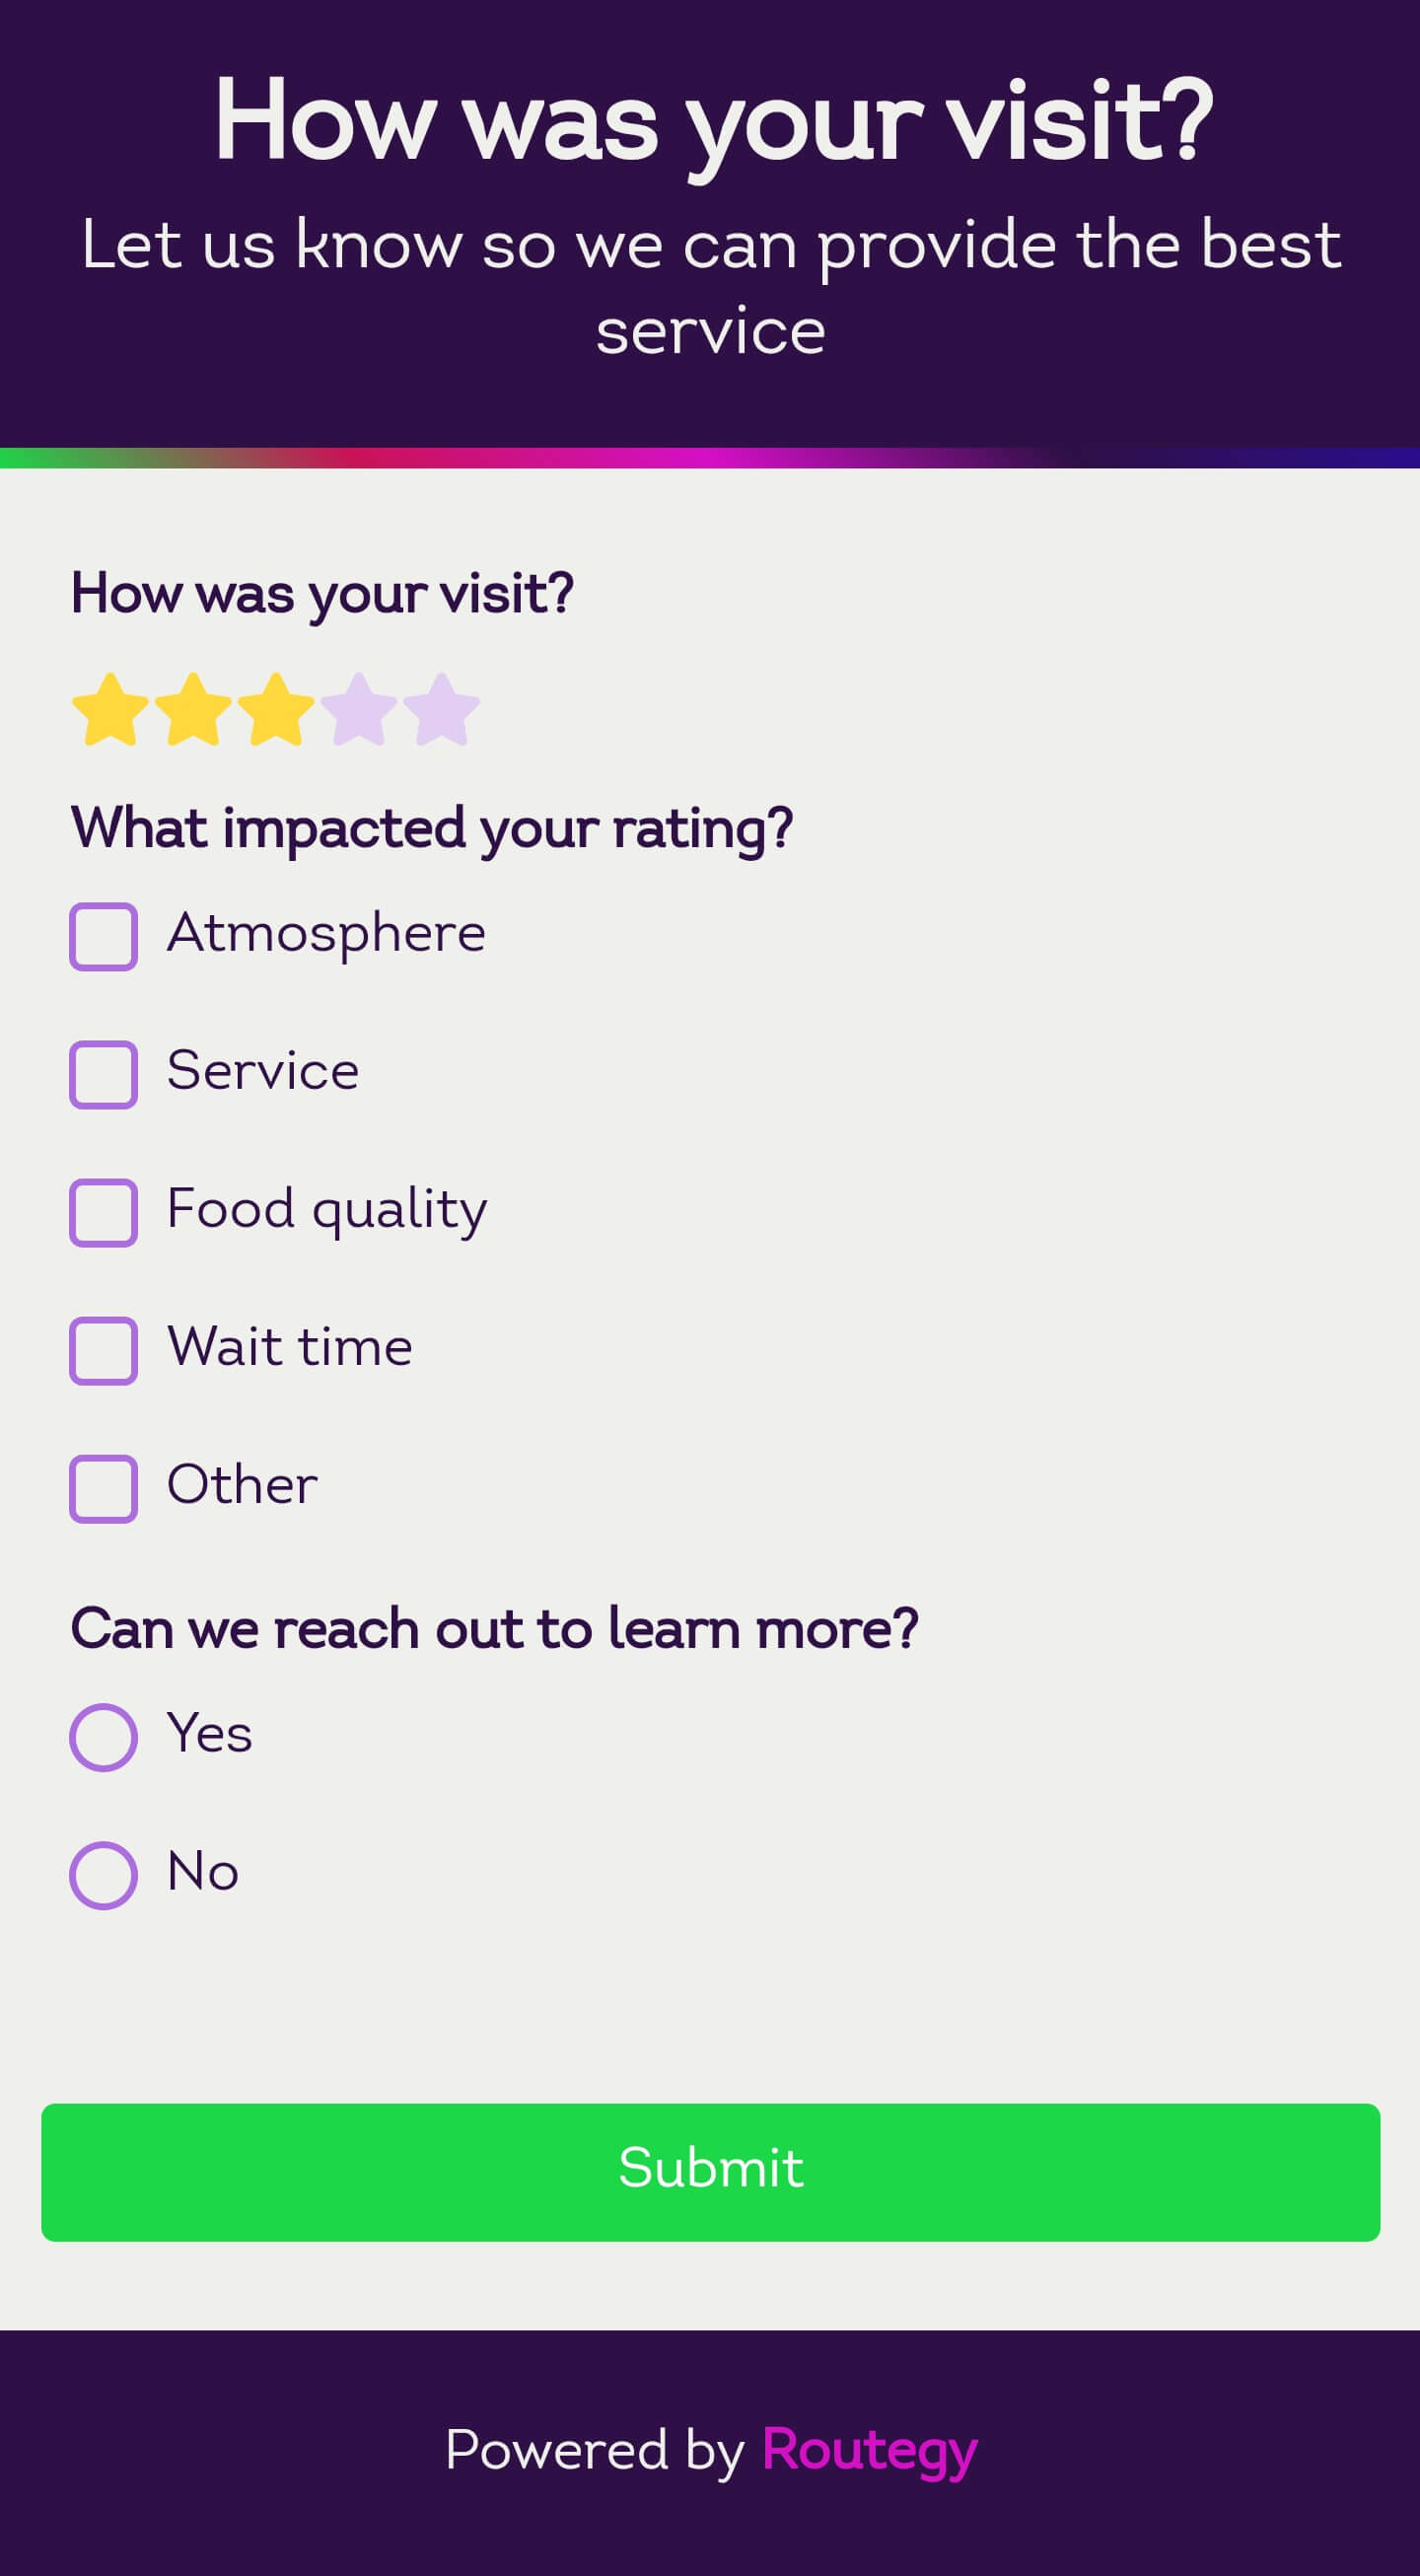 A touchpoint showing a restaurant comment card